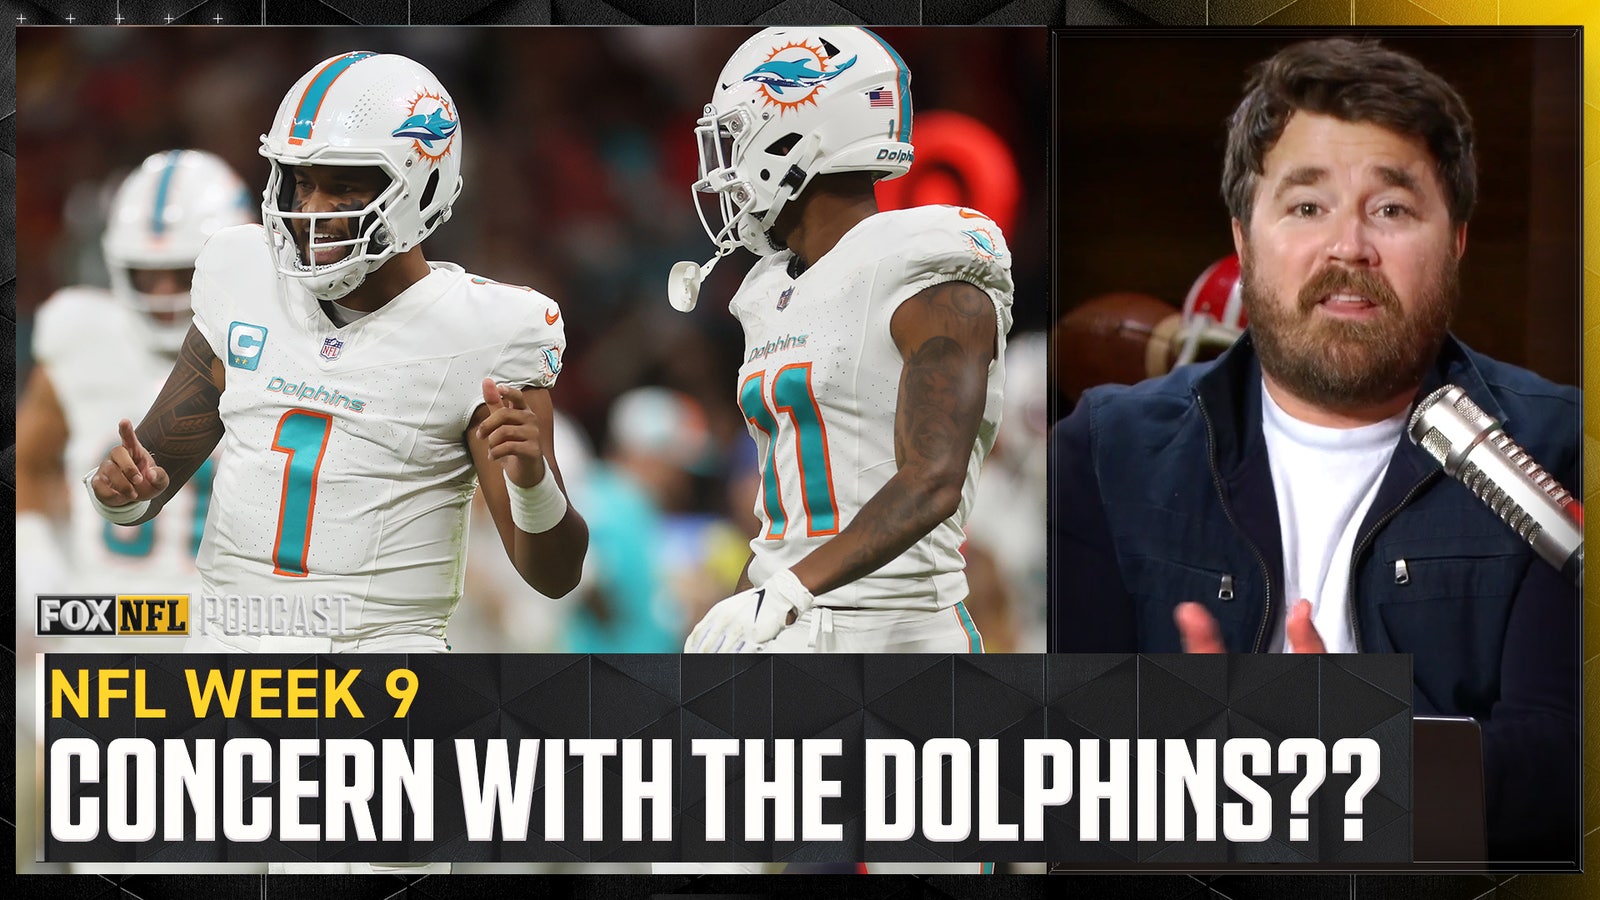 Should Dolphins be worried about inability to win vs. playoff teams? 